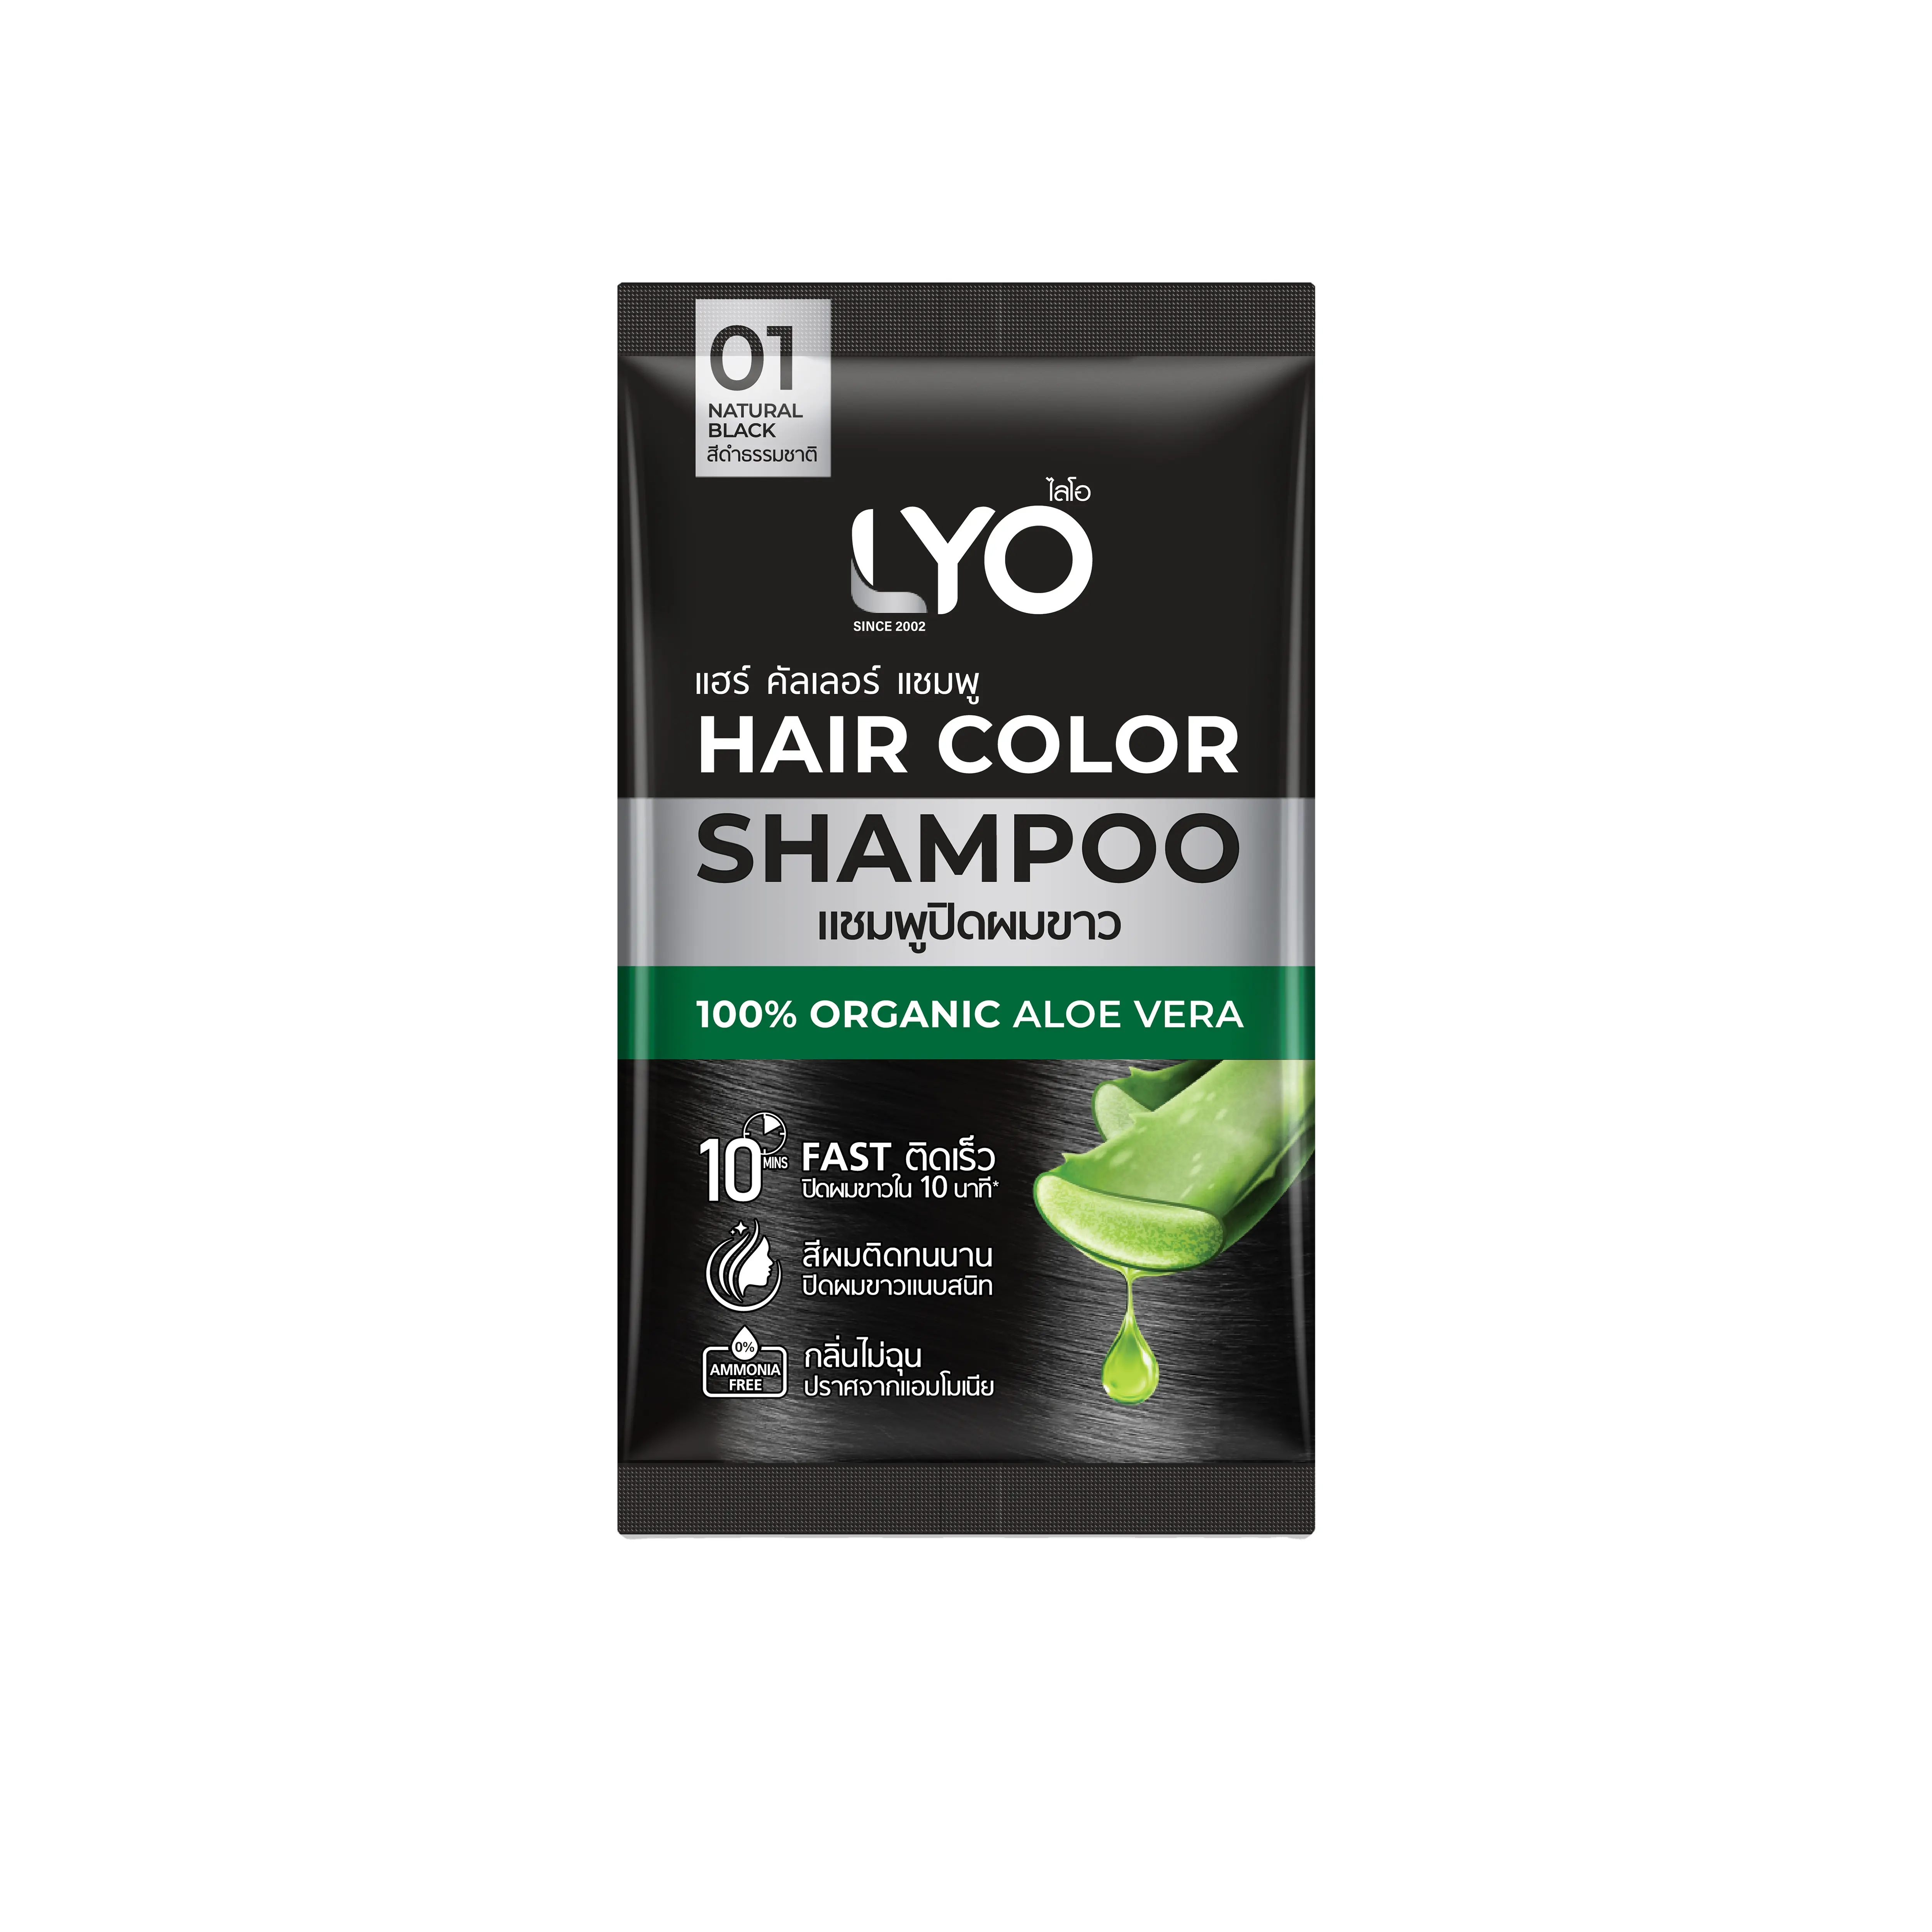 Organic Aloe Vera Ingredients Hair Color Shampoo by LYO Brand 01 Natural Black for Hair Coverage and Ammonia Free Adult use